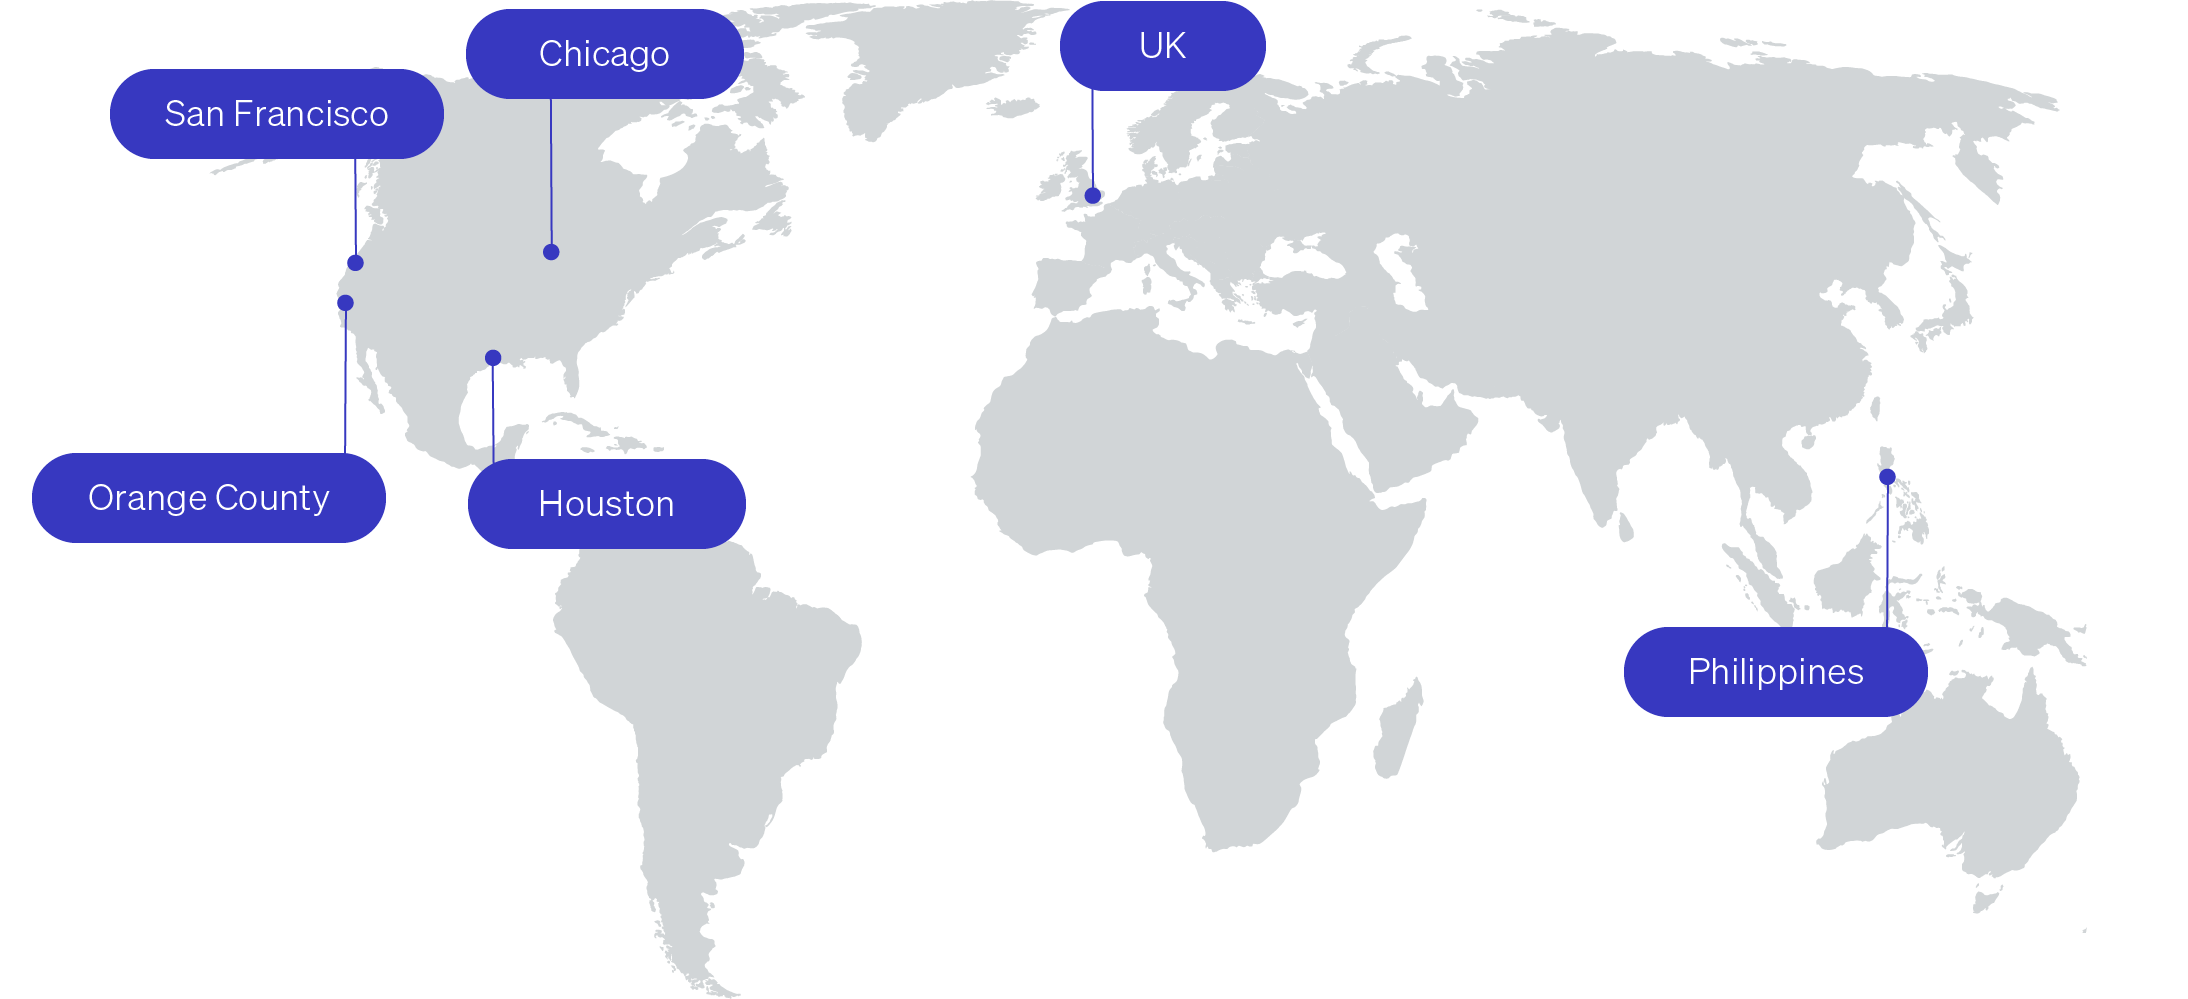 Map with San Francisco, Chicago, Orange County, Houston, UK and Philippines locations